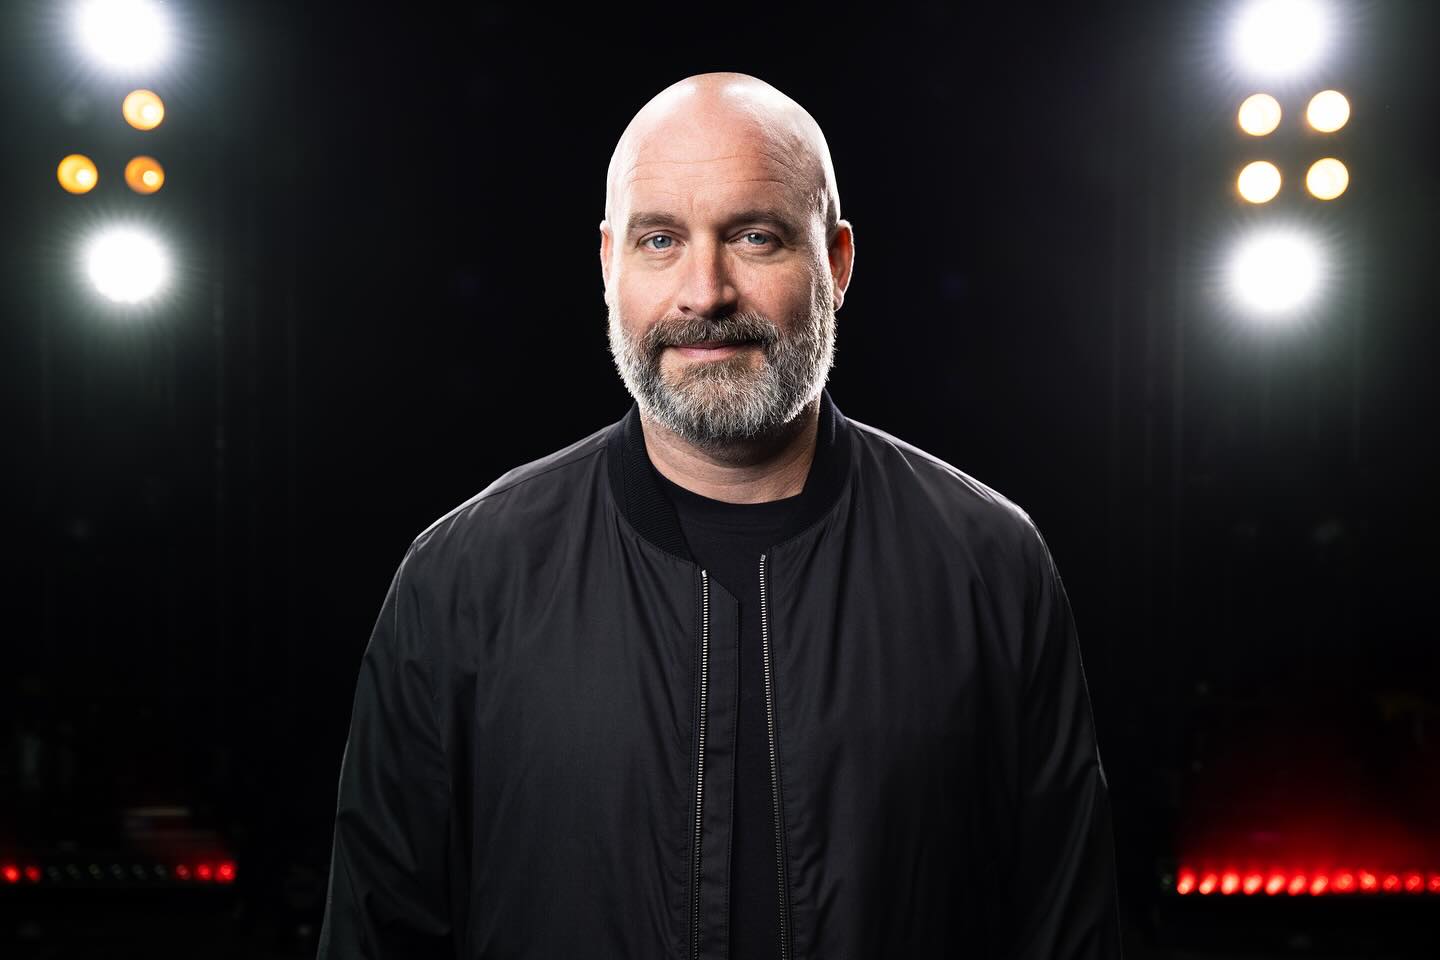 Tom Segura Biography: Age, Net Worth, Instagram, Spouse, Height, Wiki, Parents, Siblings, Songs, Movies, Awards